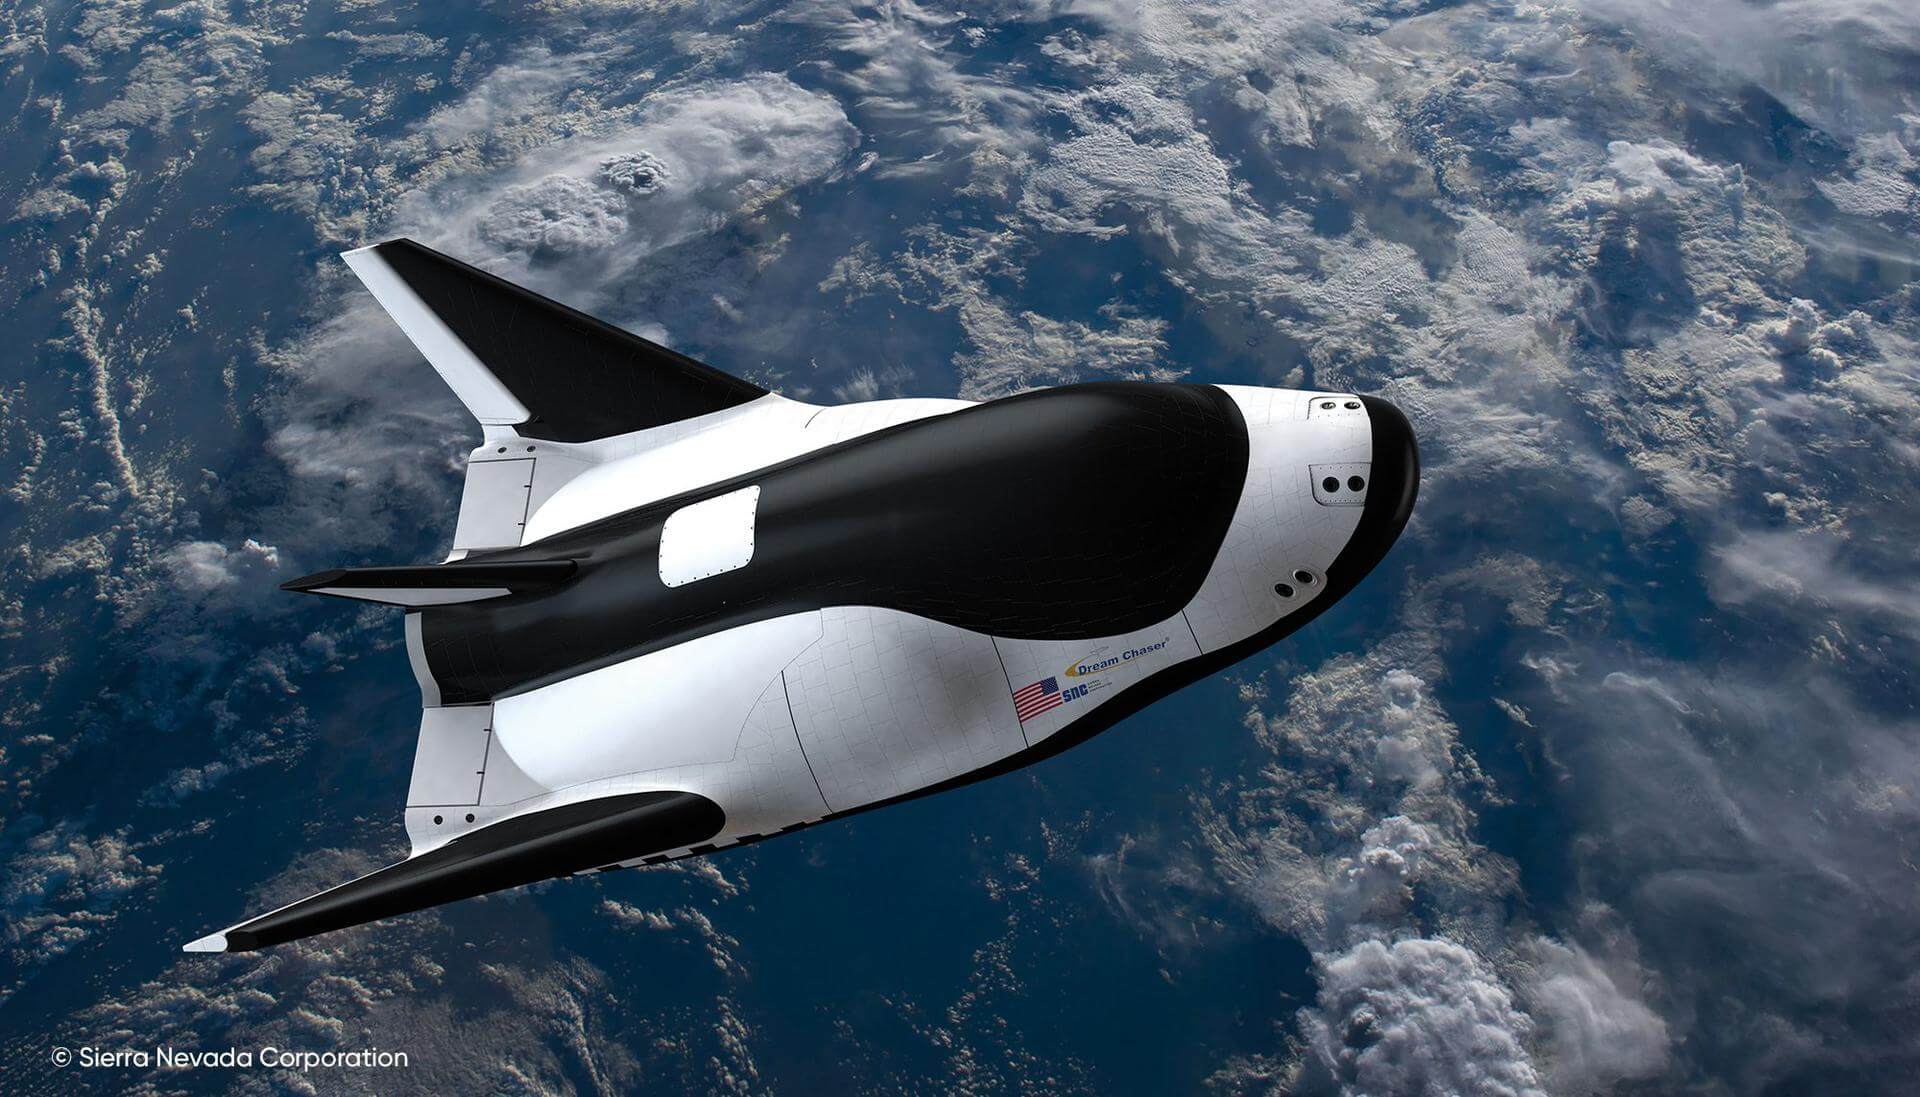 SNC-1 Dream Chaser Berthing Event image